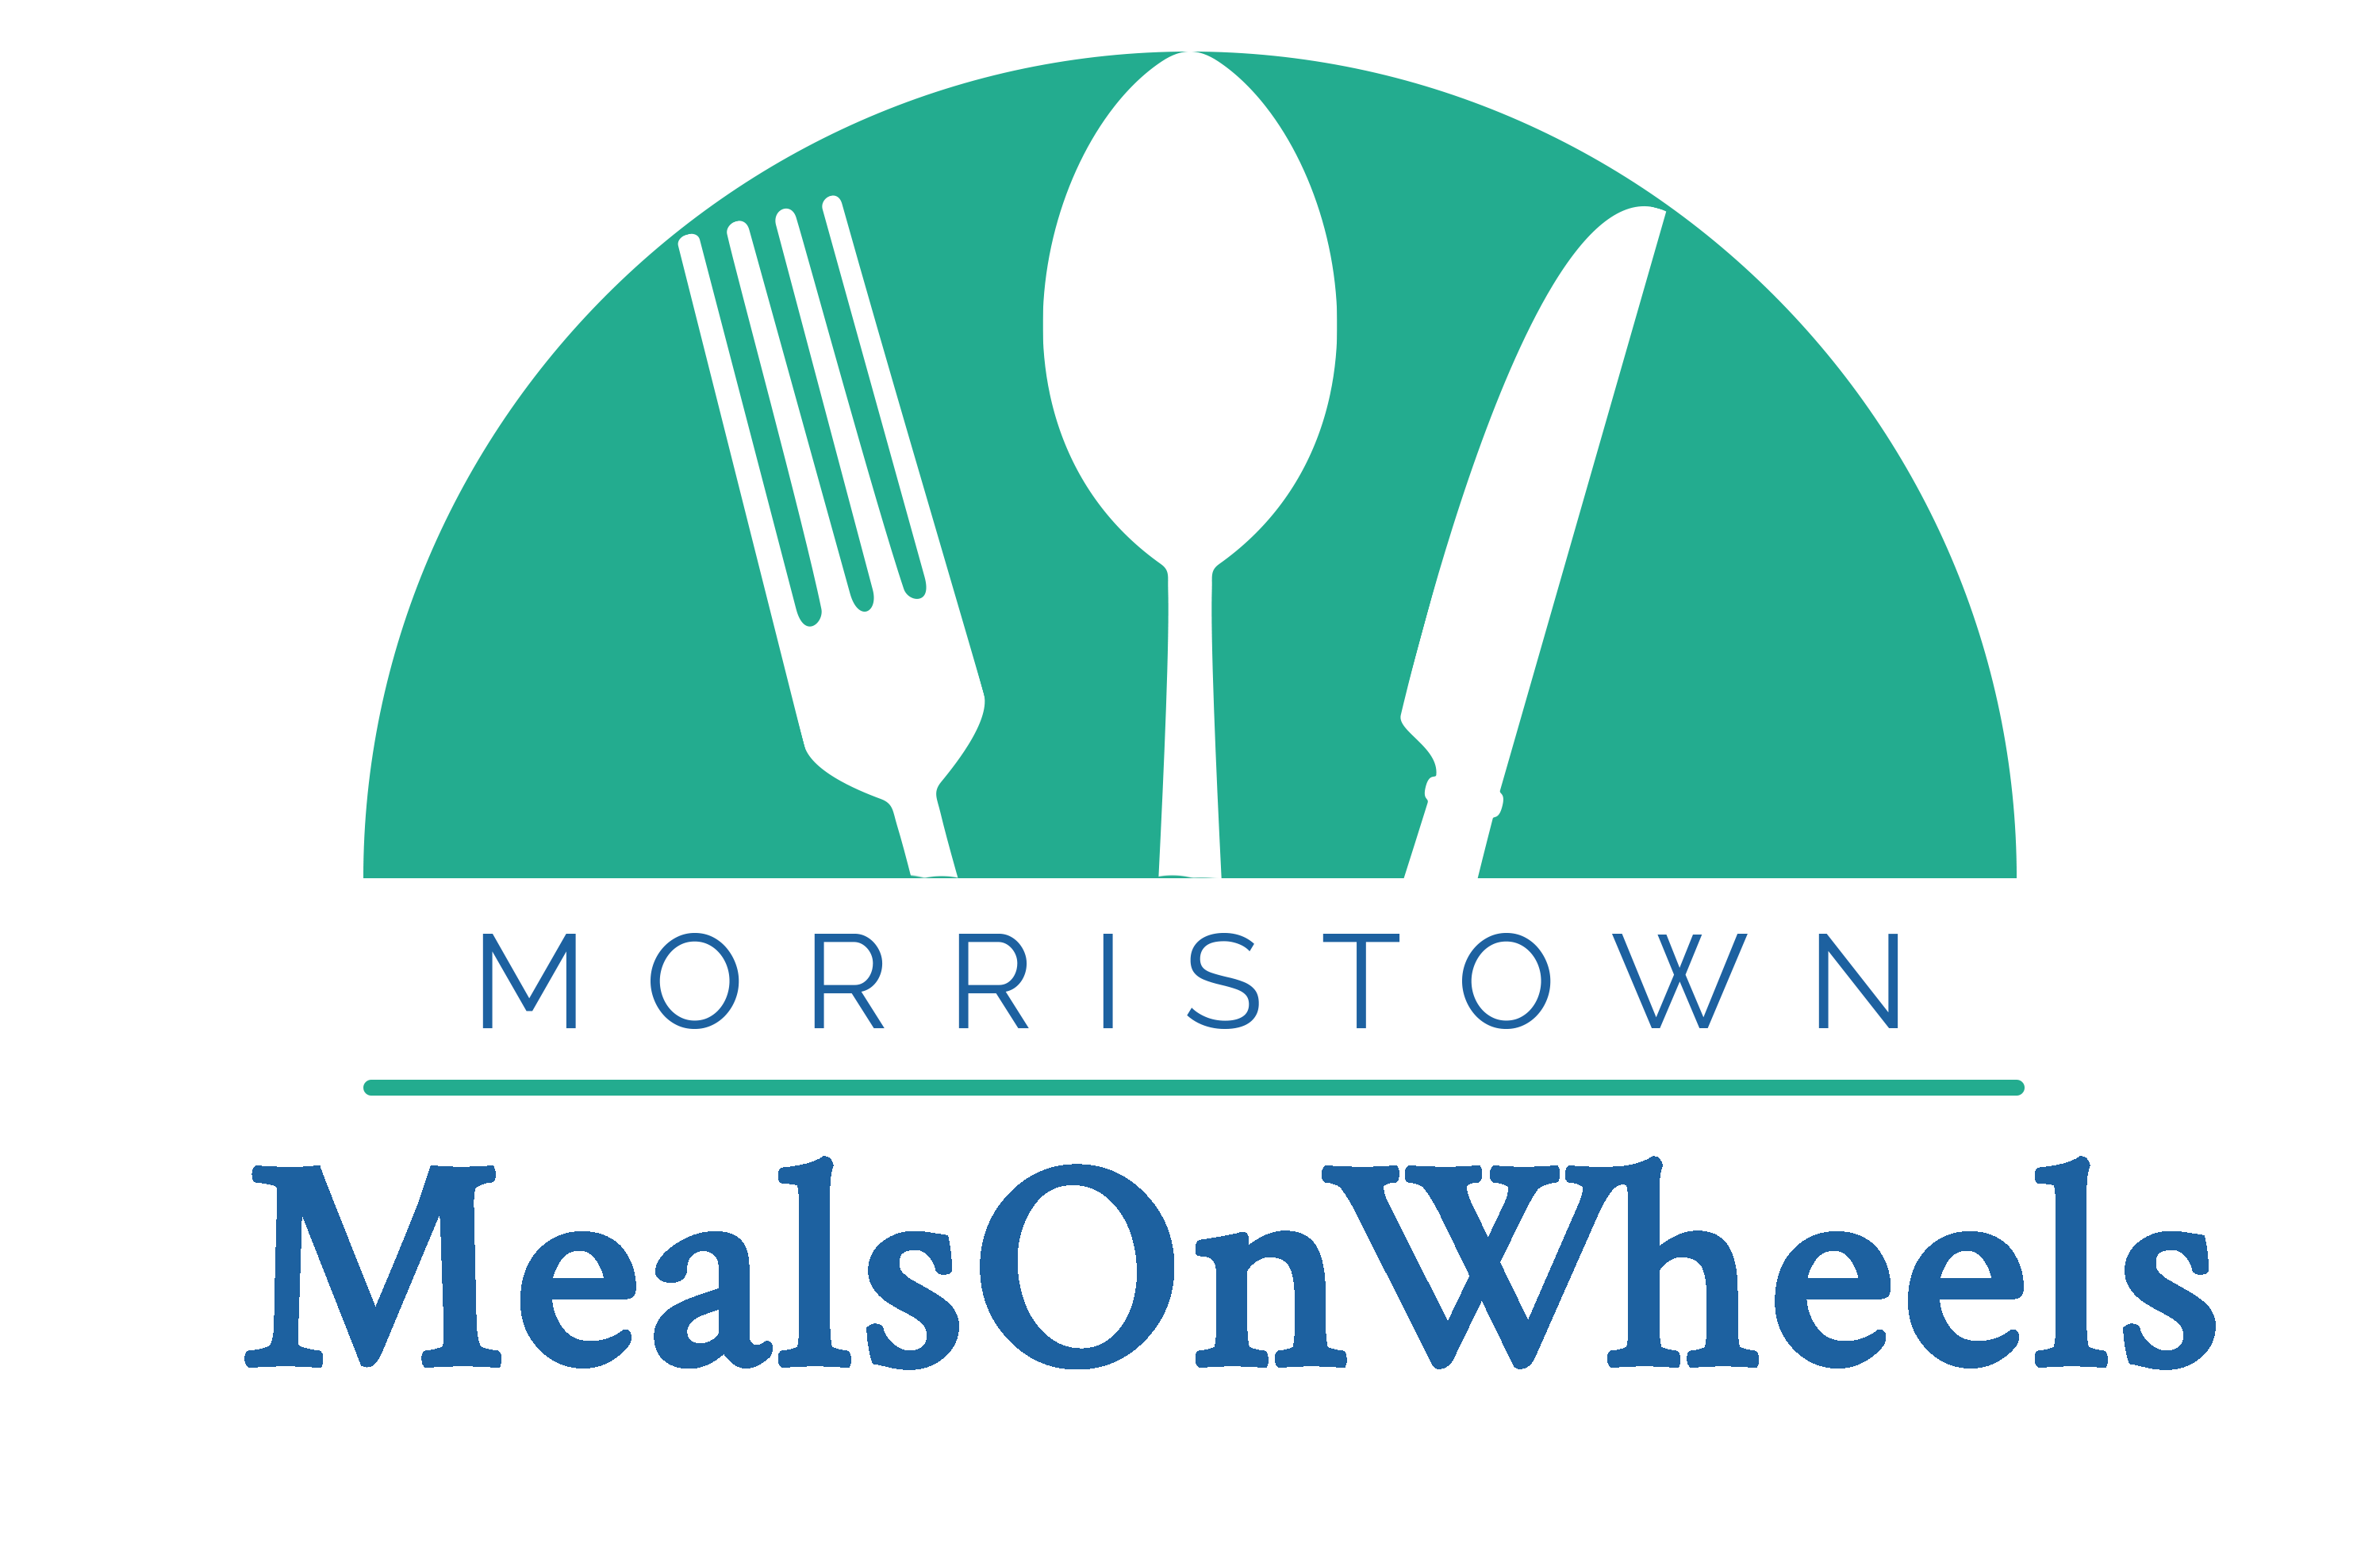 Sleeping Bear Productions' "Beyond the Green" Podcast to Feature Morristown Meals On Wheels